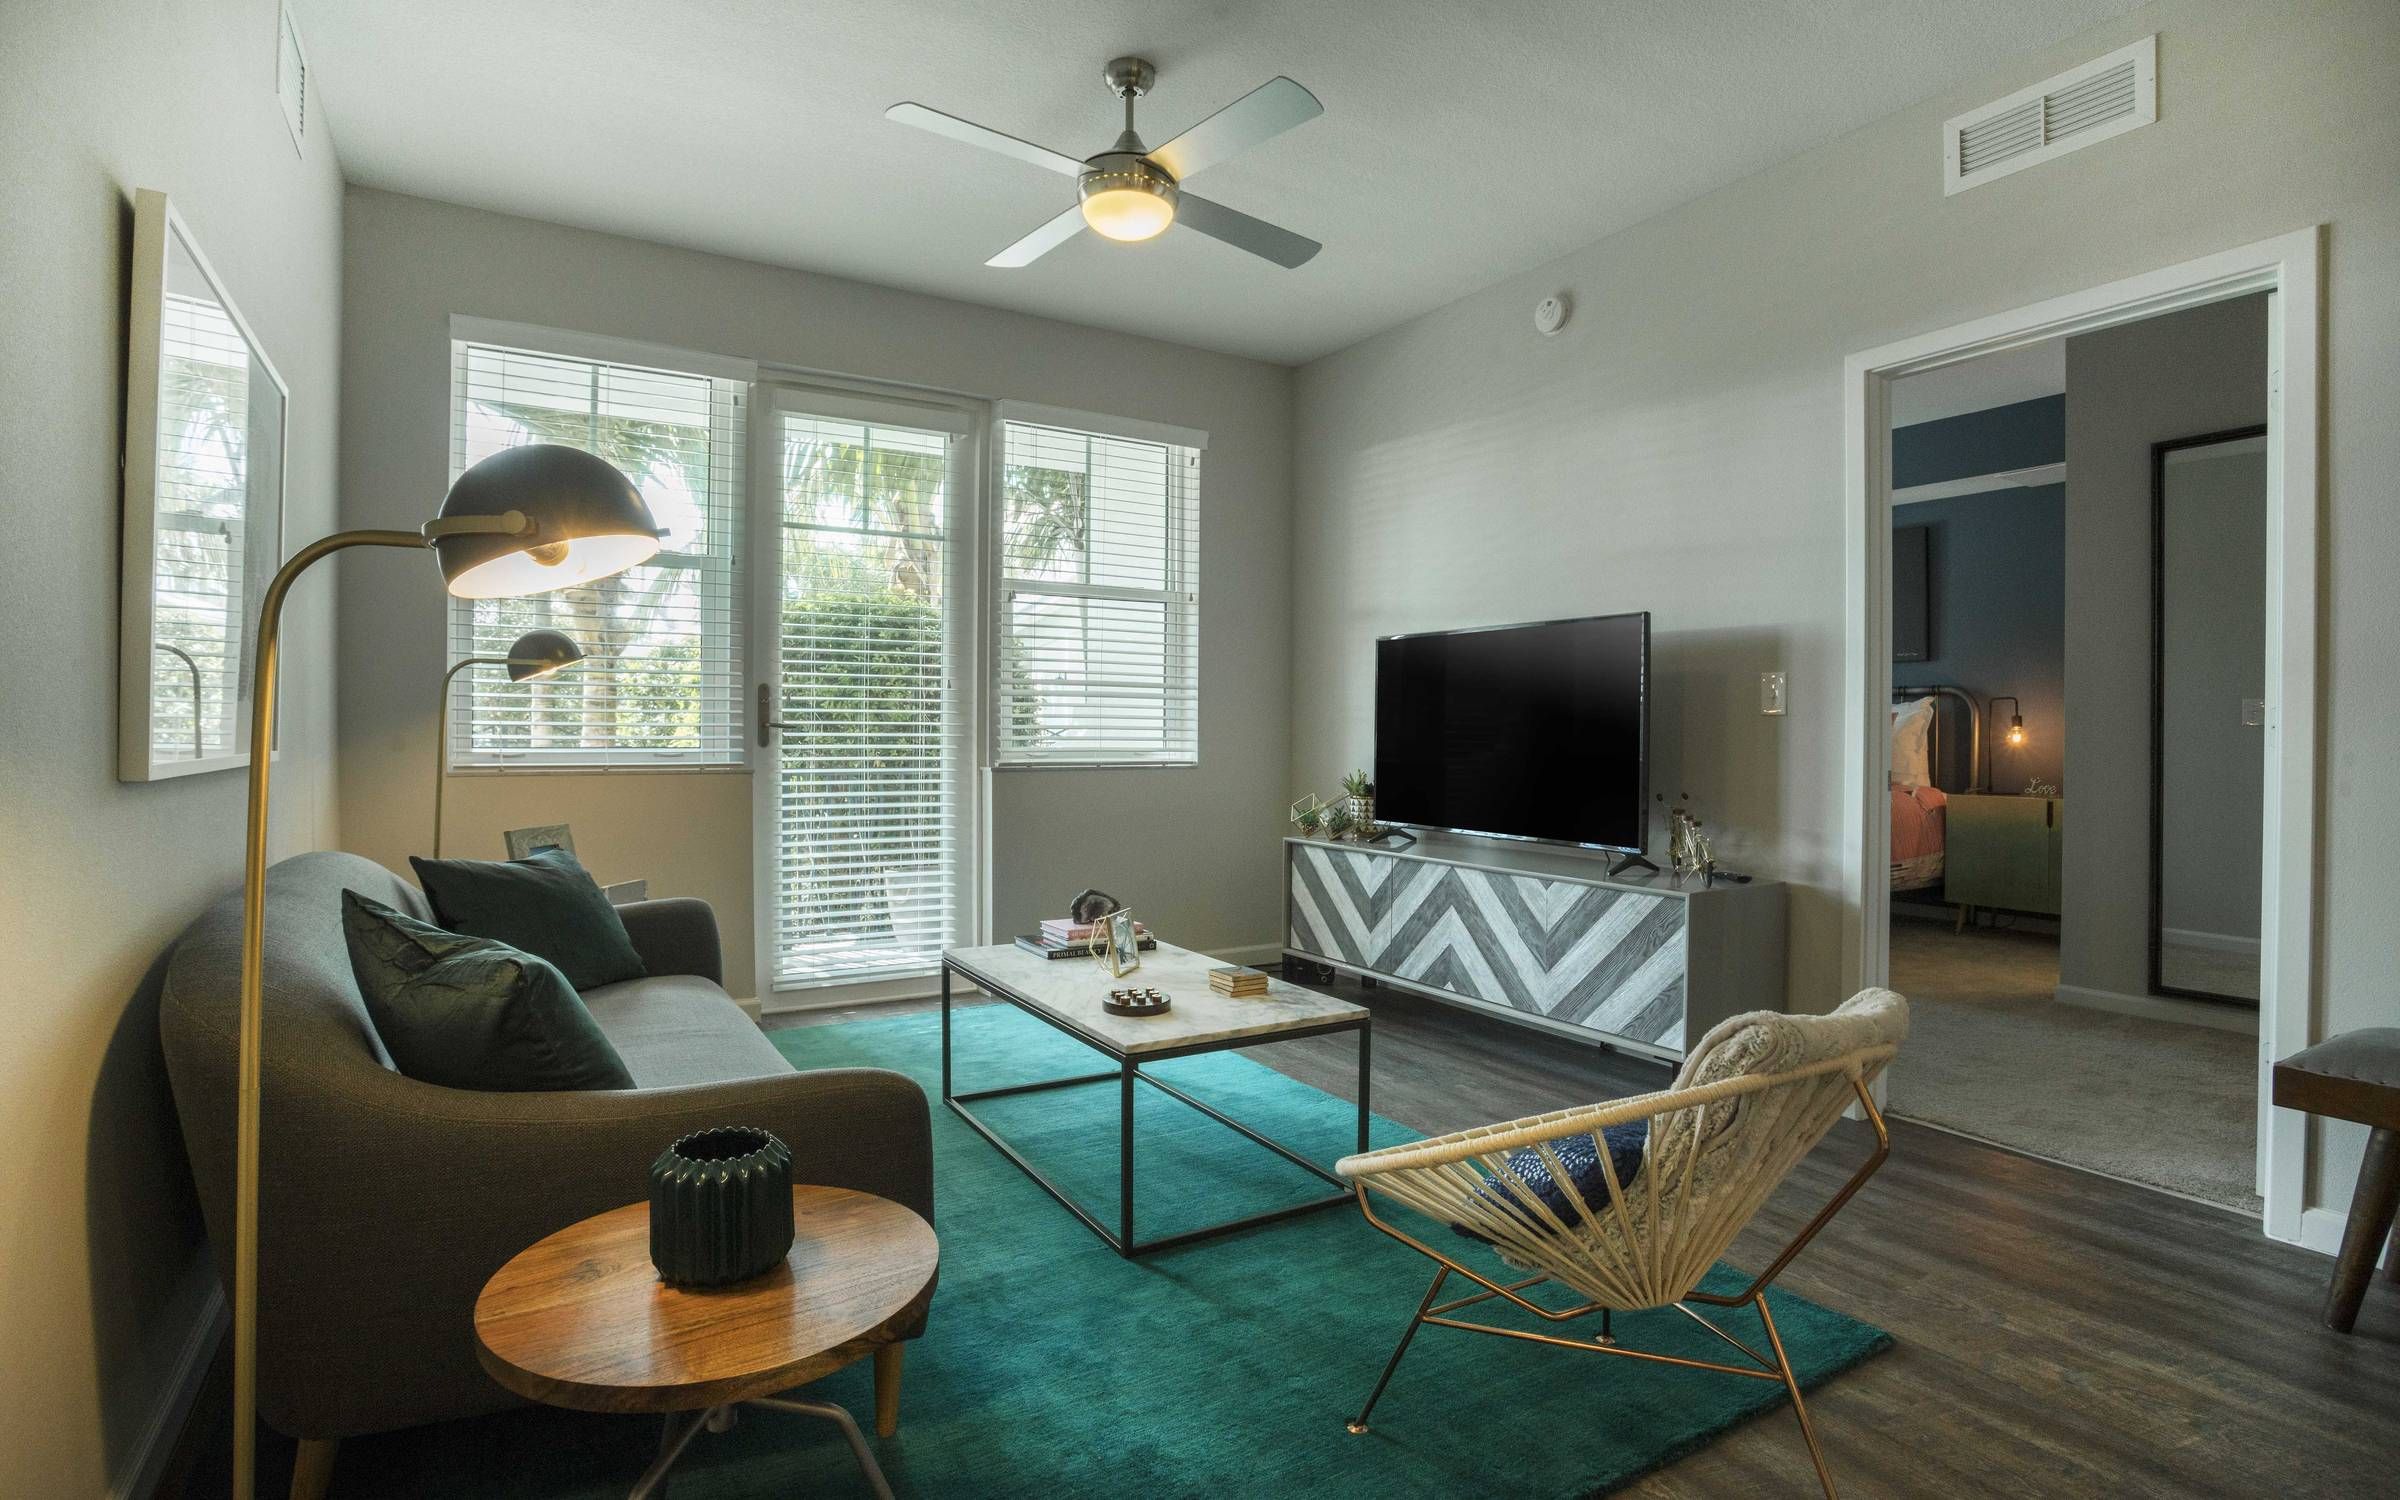 Delray Station living room with windows and hardwood floor.